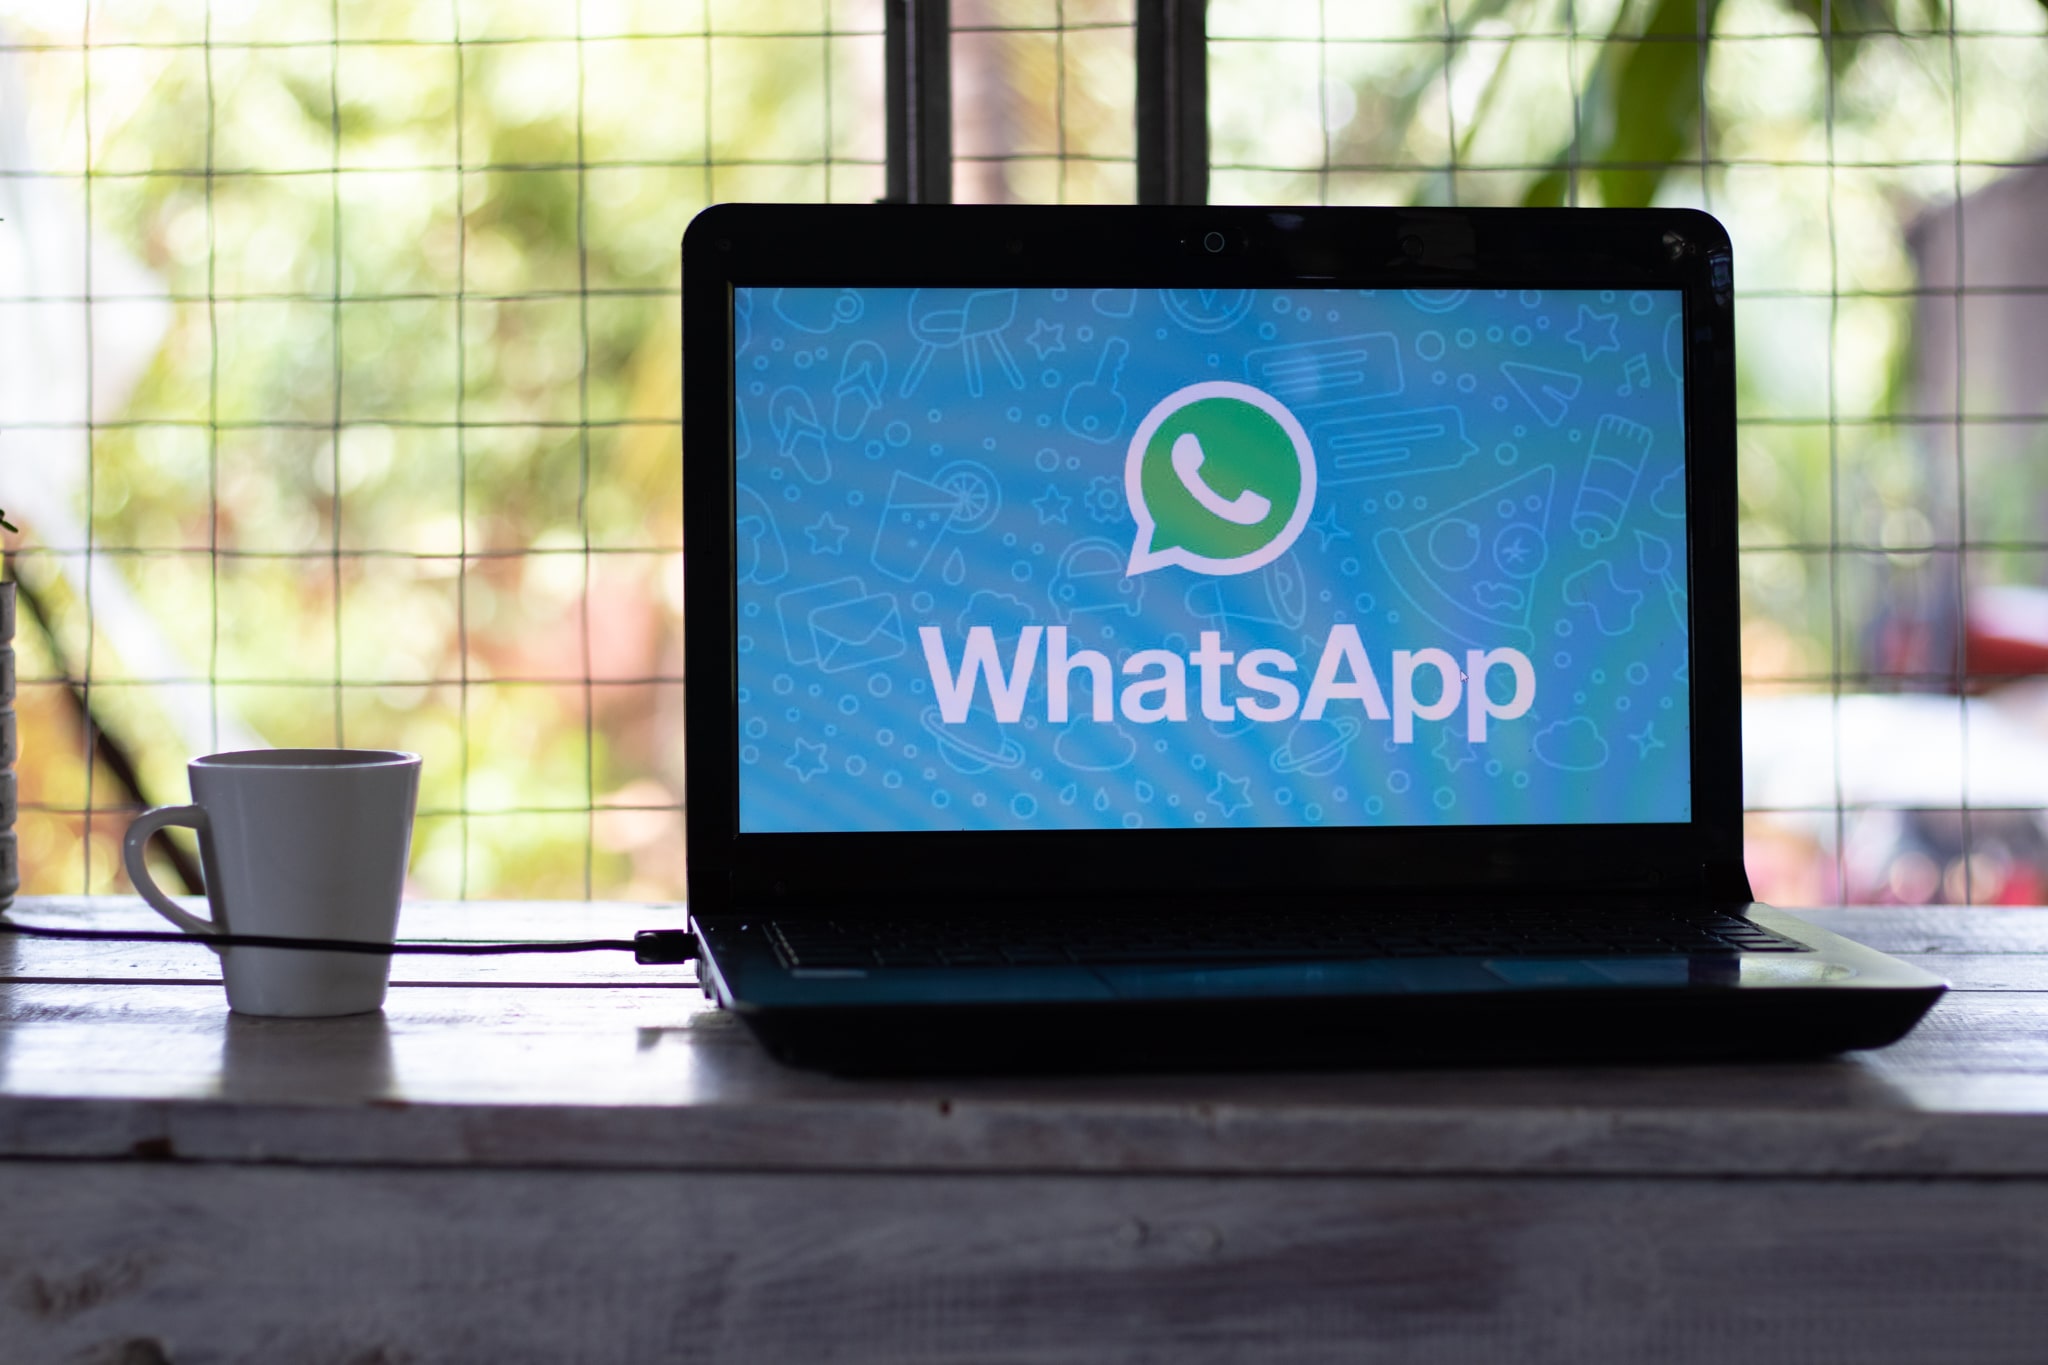 Discover now 3 amazing ways to customize WhatsApp, and even change its color to green